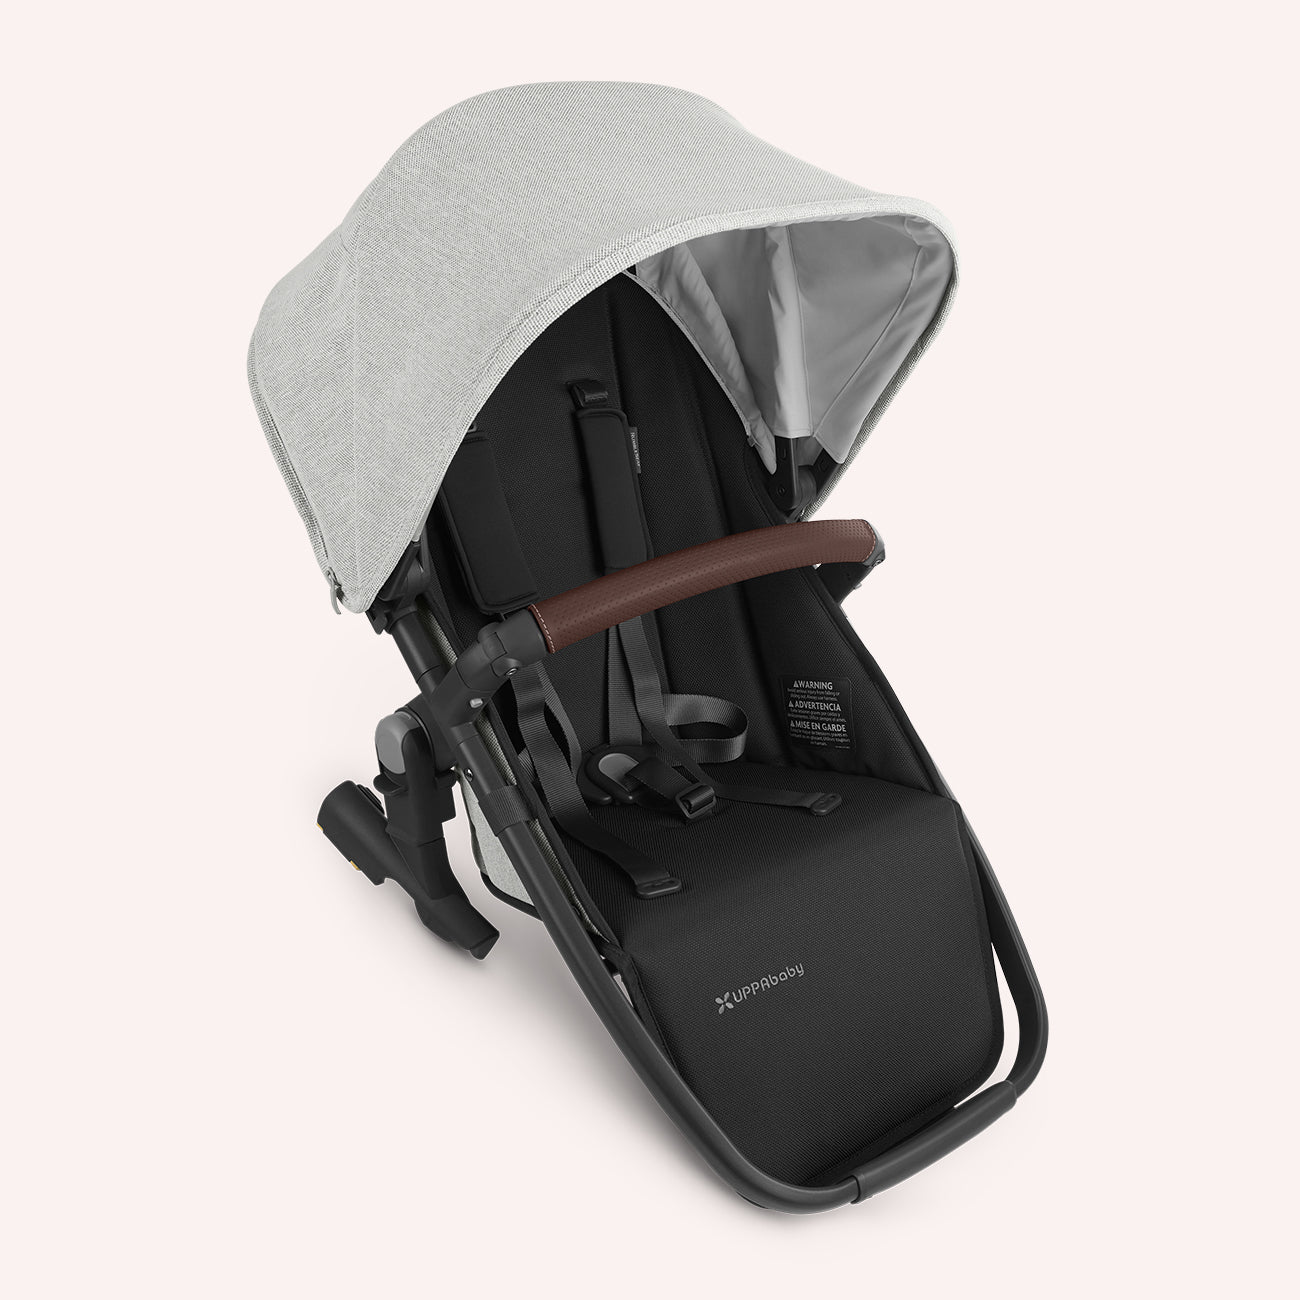 Uppababy Vista & Maxi Cosi Twin Bundle - White & Grey Chenille/Carbon (Anthony)